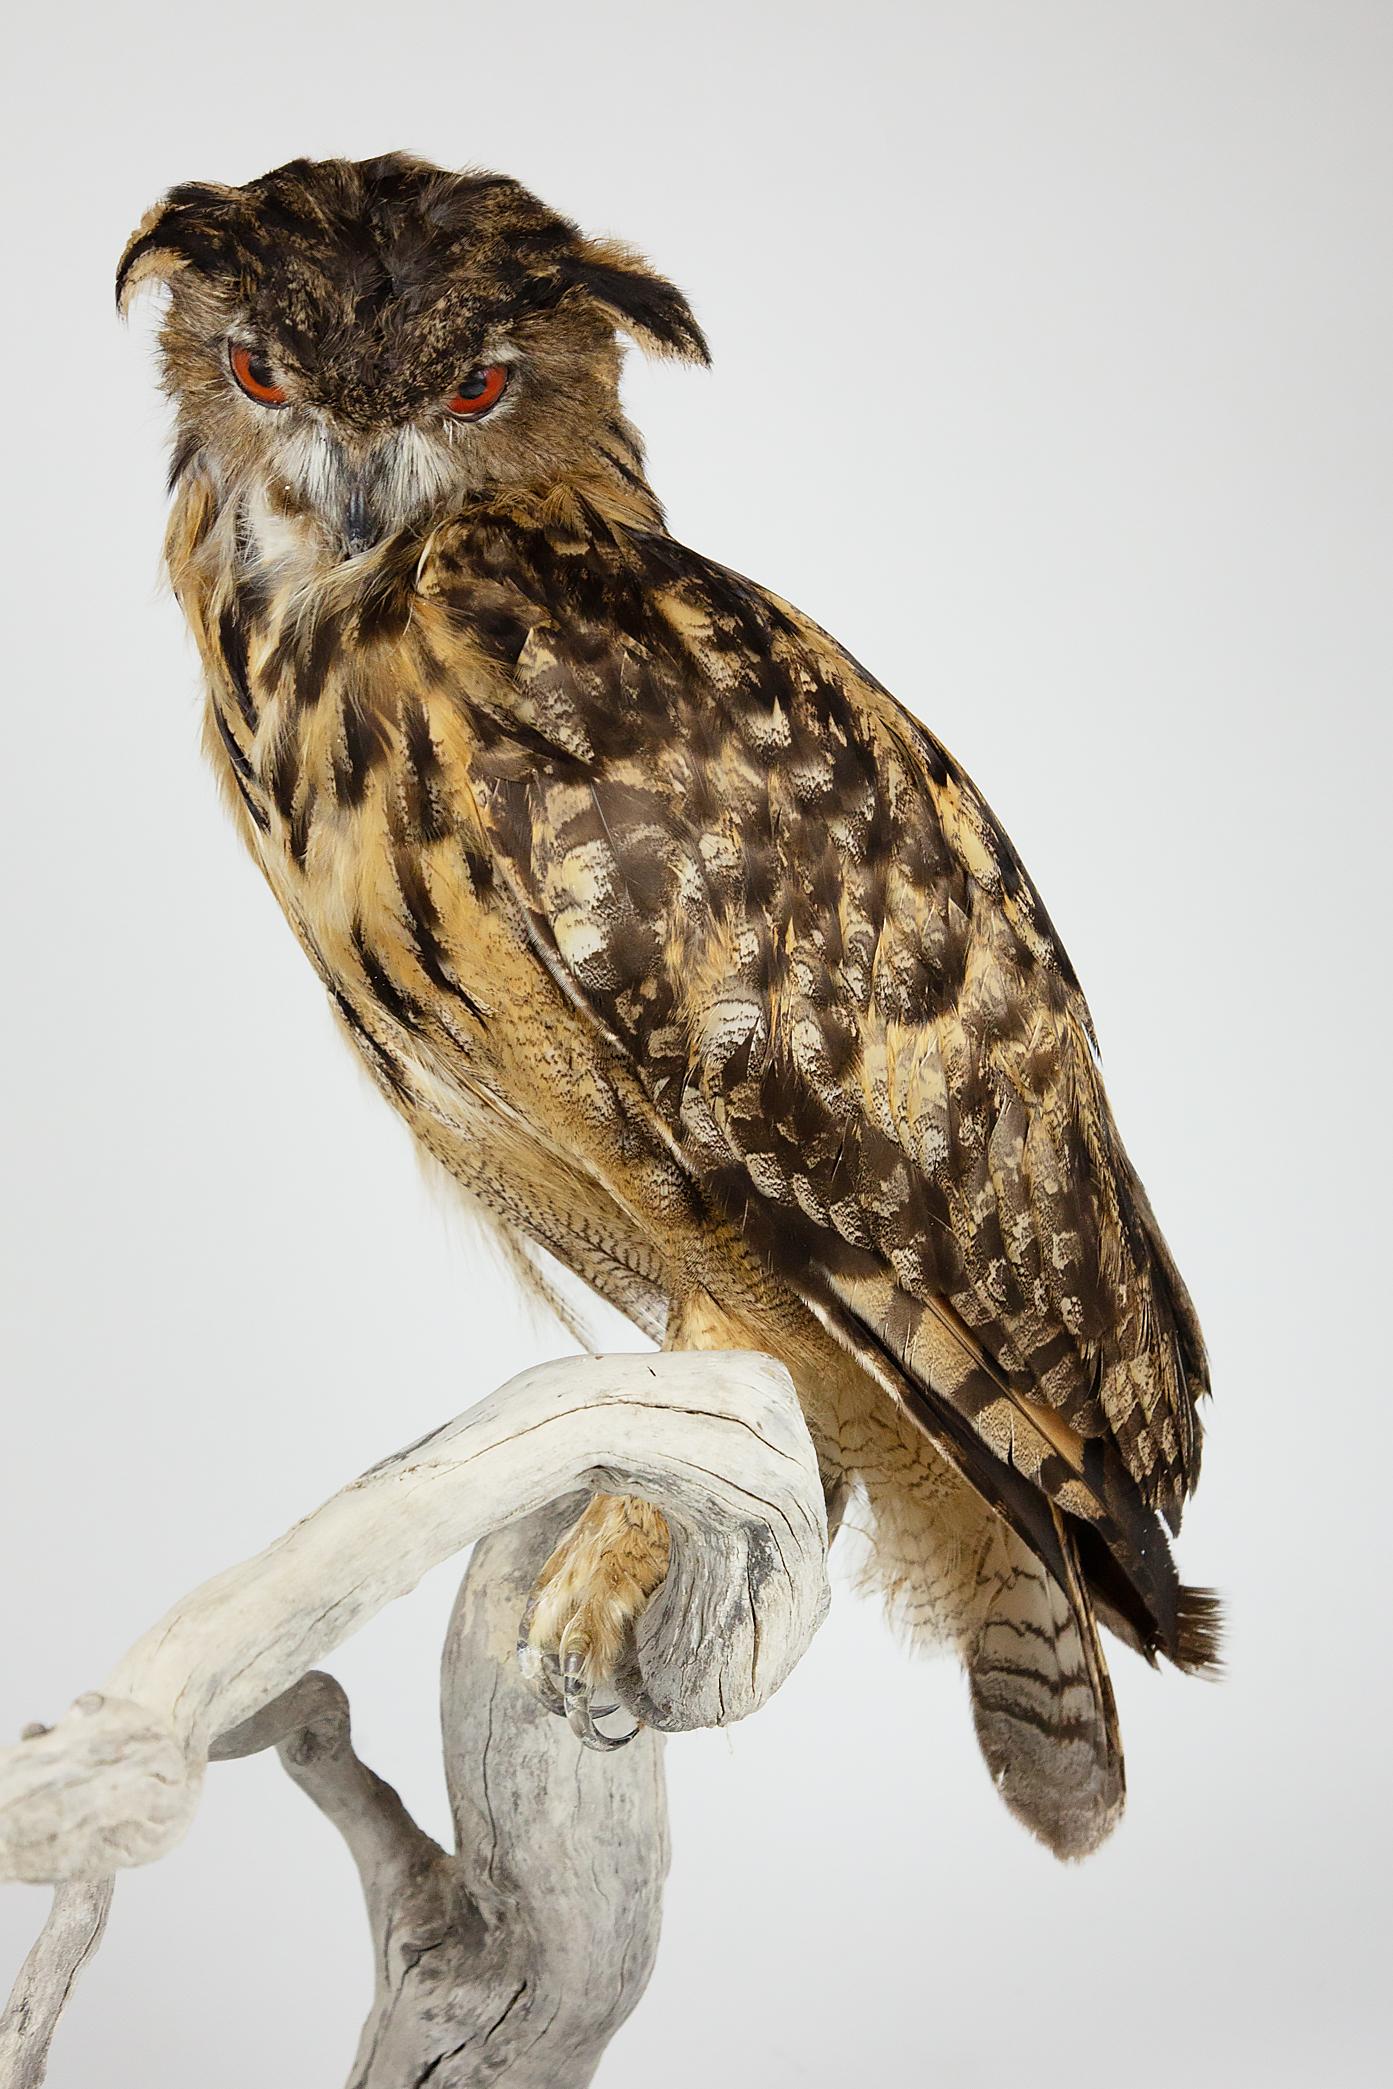 Eurasian eagle-owls are one of the largest species of owls that exist. They are found mostly in Eurasia and throughout Europe. This example is very large and is mounted with the owl in a naturalistic pose.